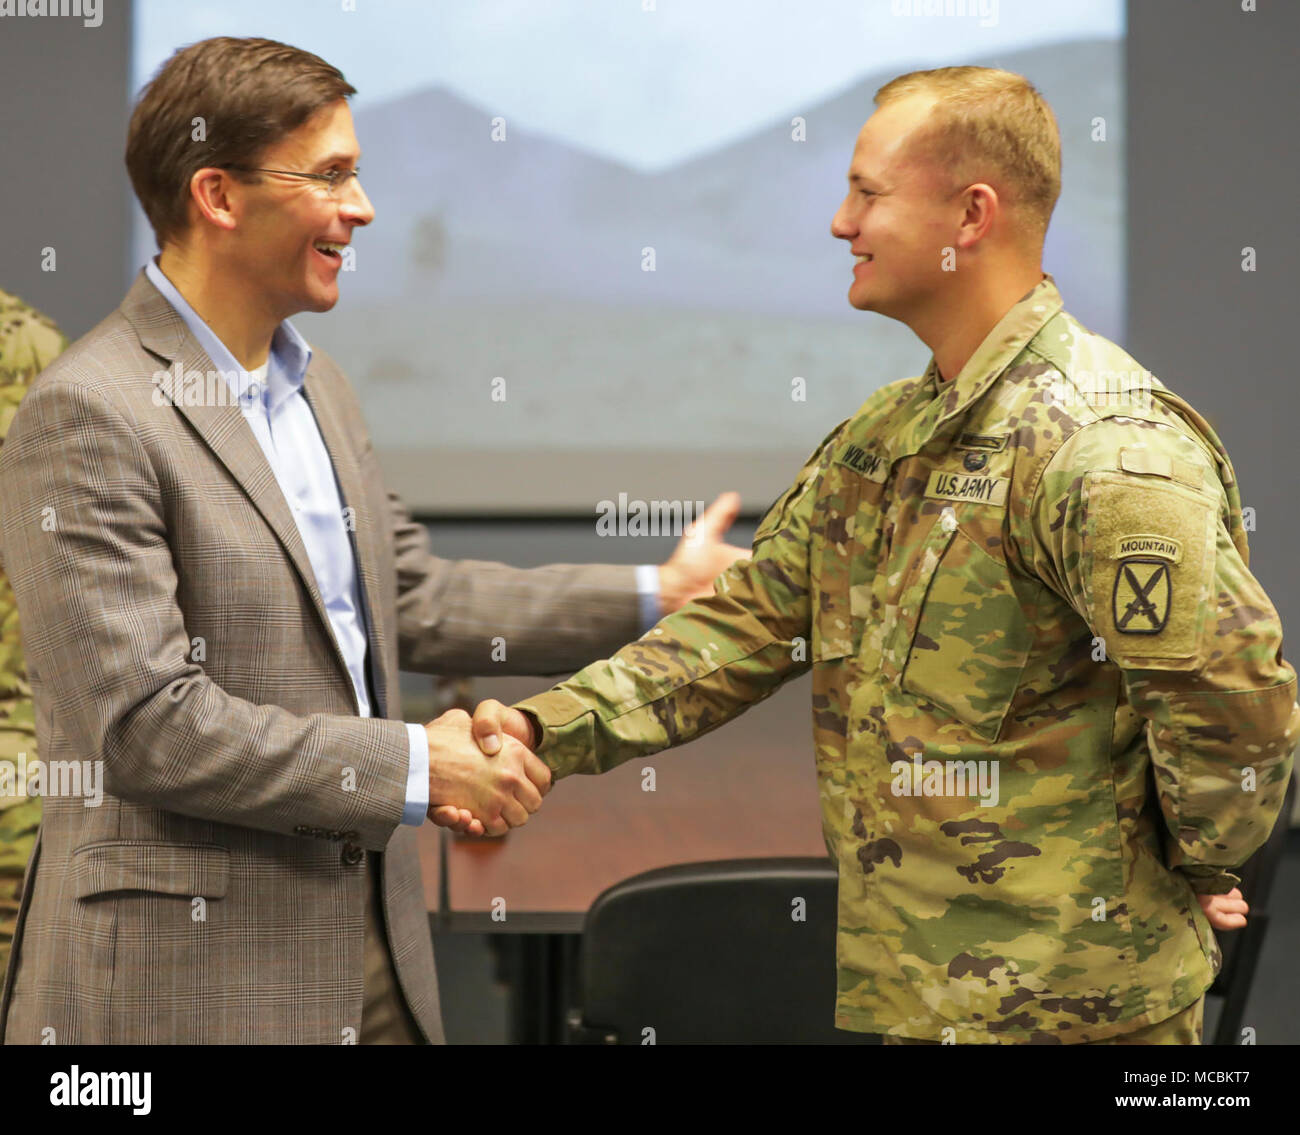 Secretary of the Army, Dr. Mark Esper (left) awards Spc. Holden Wilson, 1st Brigade Combat Team, 10th Mountain Division with a Challenge Coin for his achievements while deployed to Djibouti, Africa as part of the East Africa Response Force within the Regionally Aligned Forces Mission in support of Combined Joint Task Force-Horn of Africa. Wilson is a native of Pisgah, Alabama. Stock Photo